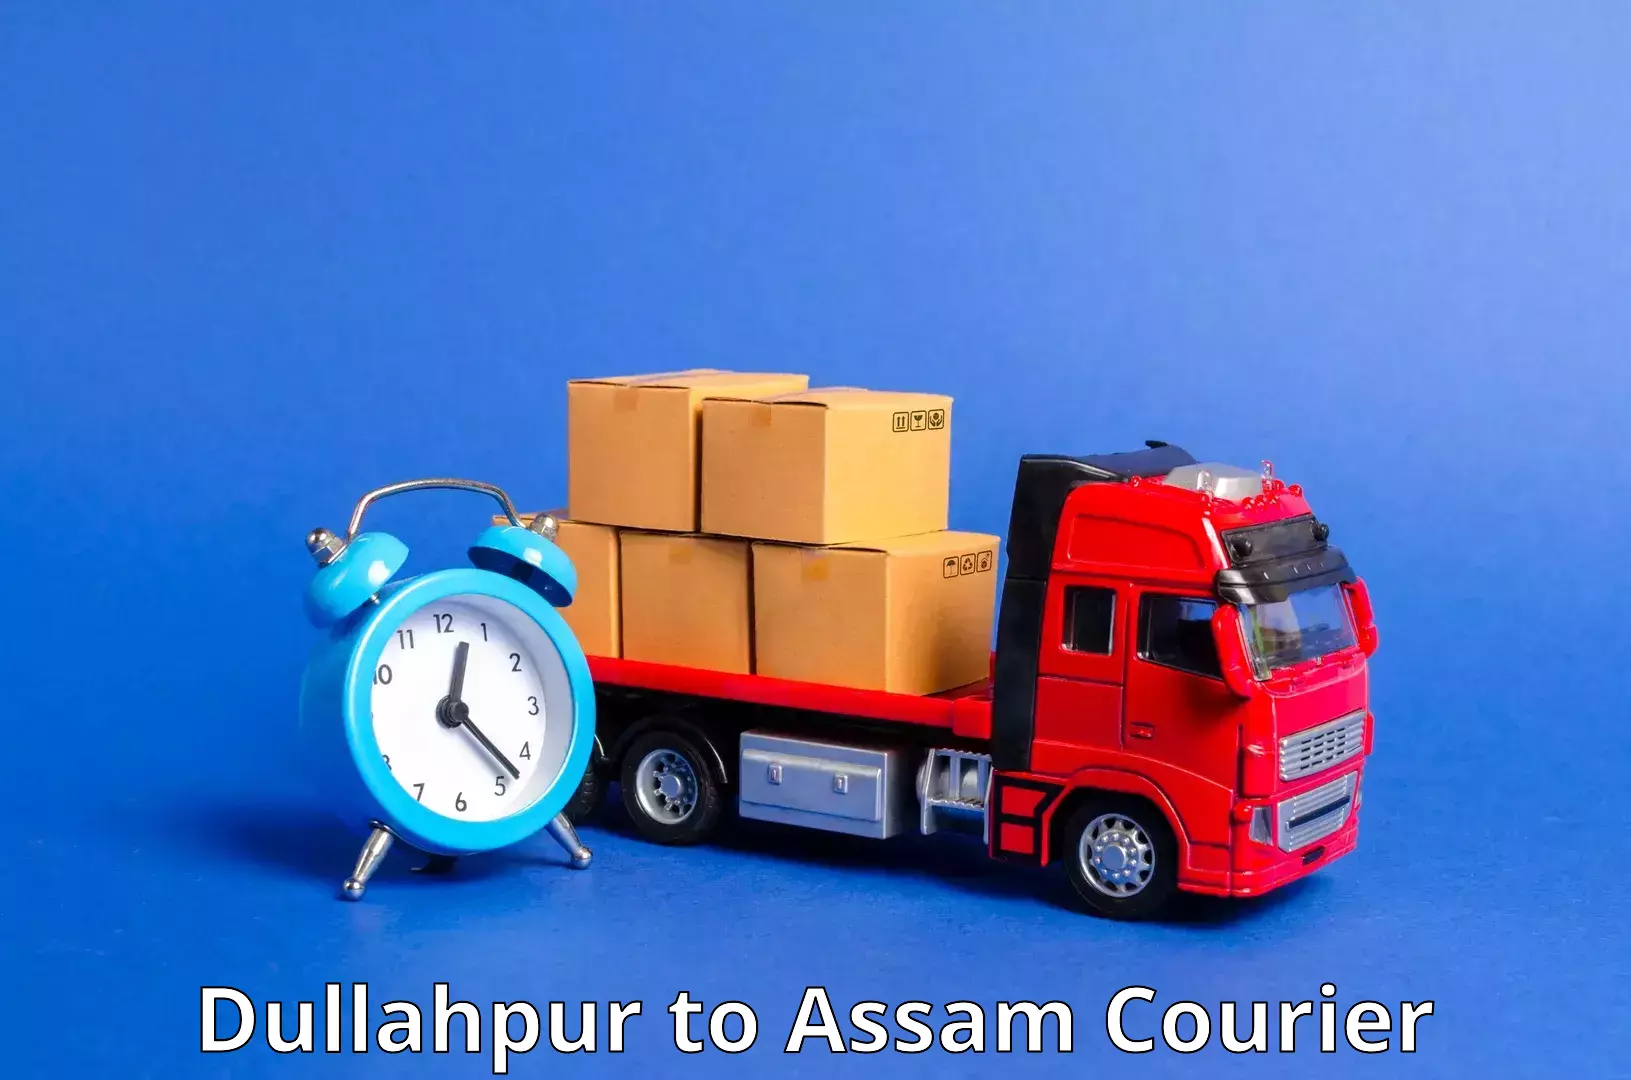 Overnight delivery services Dullahpur to Rupai Siding